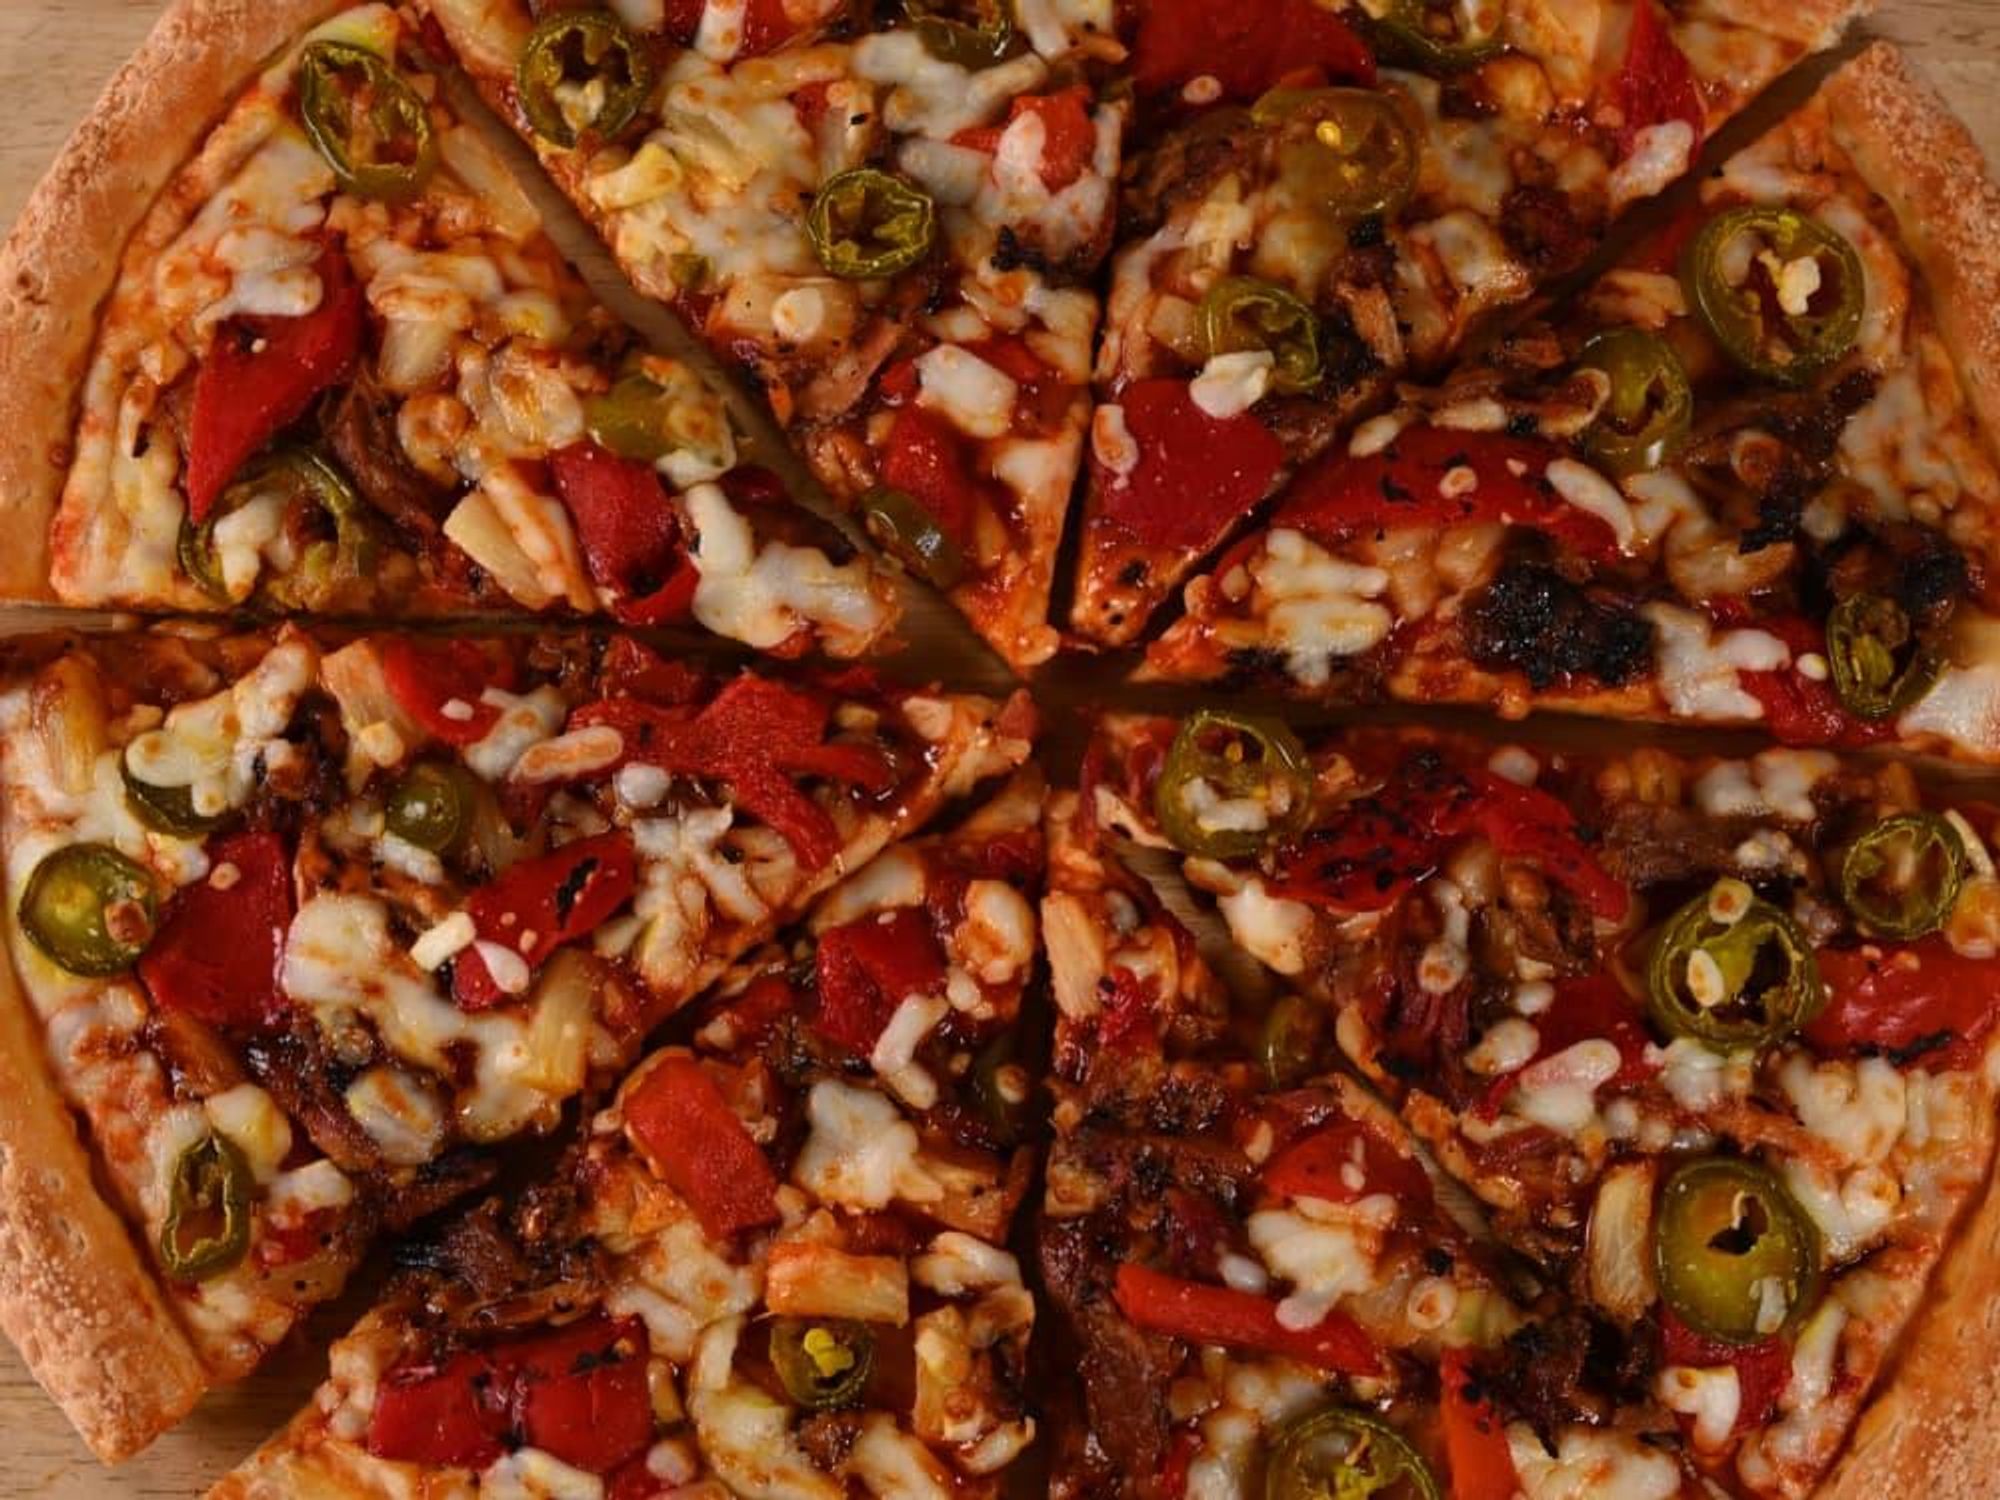 Papa Johns delivers 'space-flavored' pizza inspired by flown